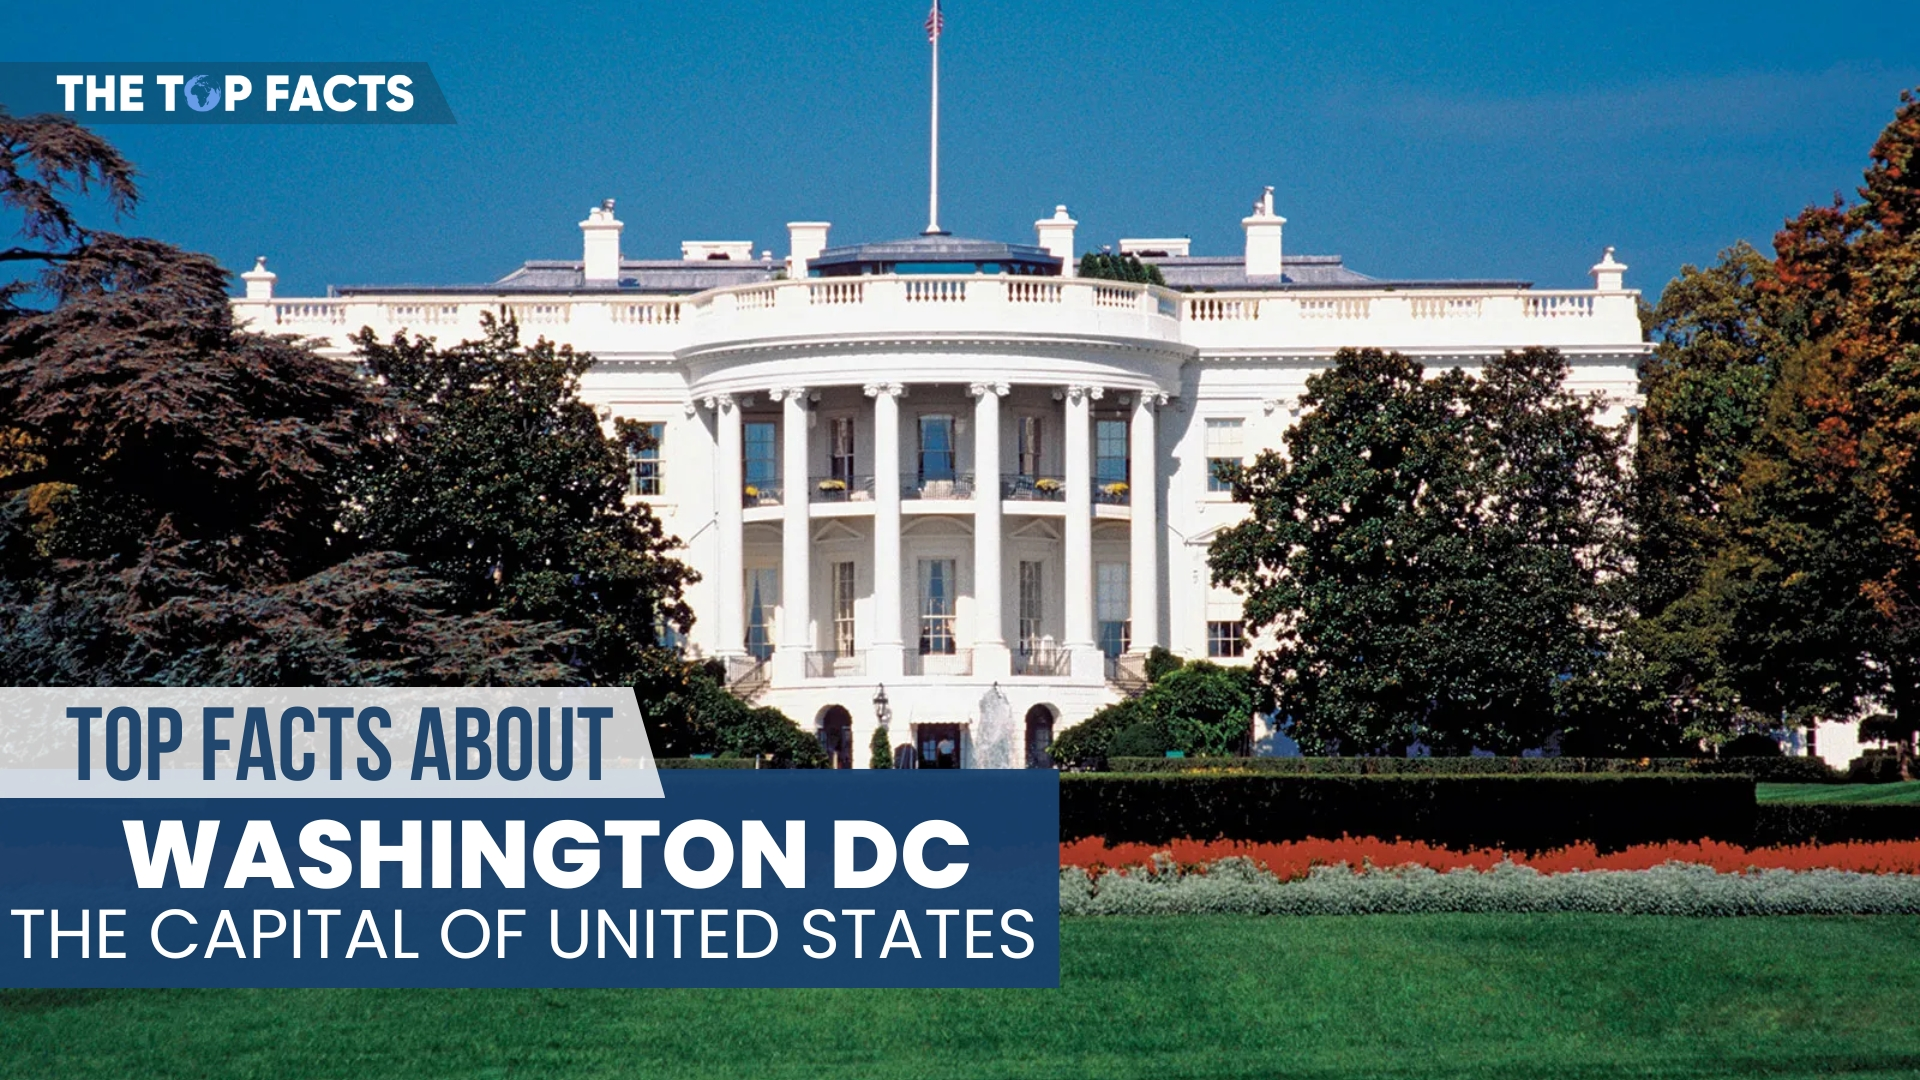 Top Facts About Washington DC, Capital of United States